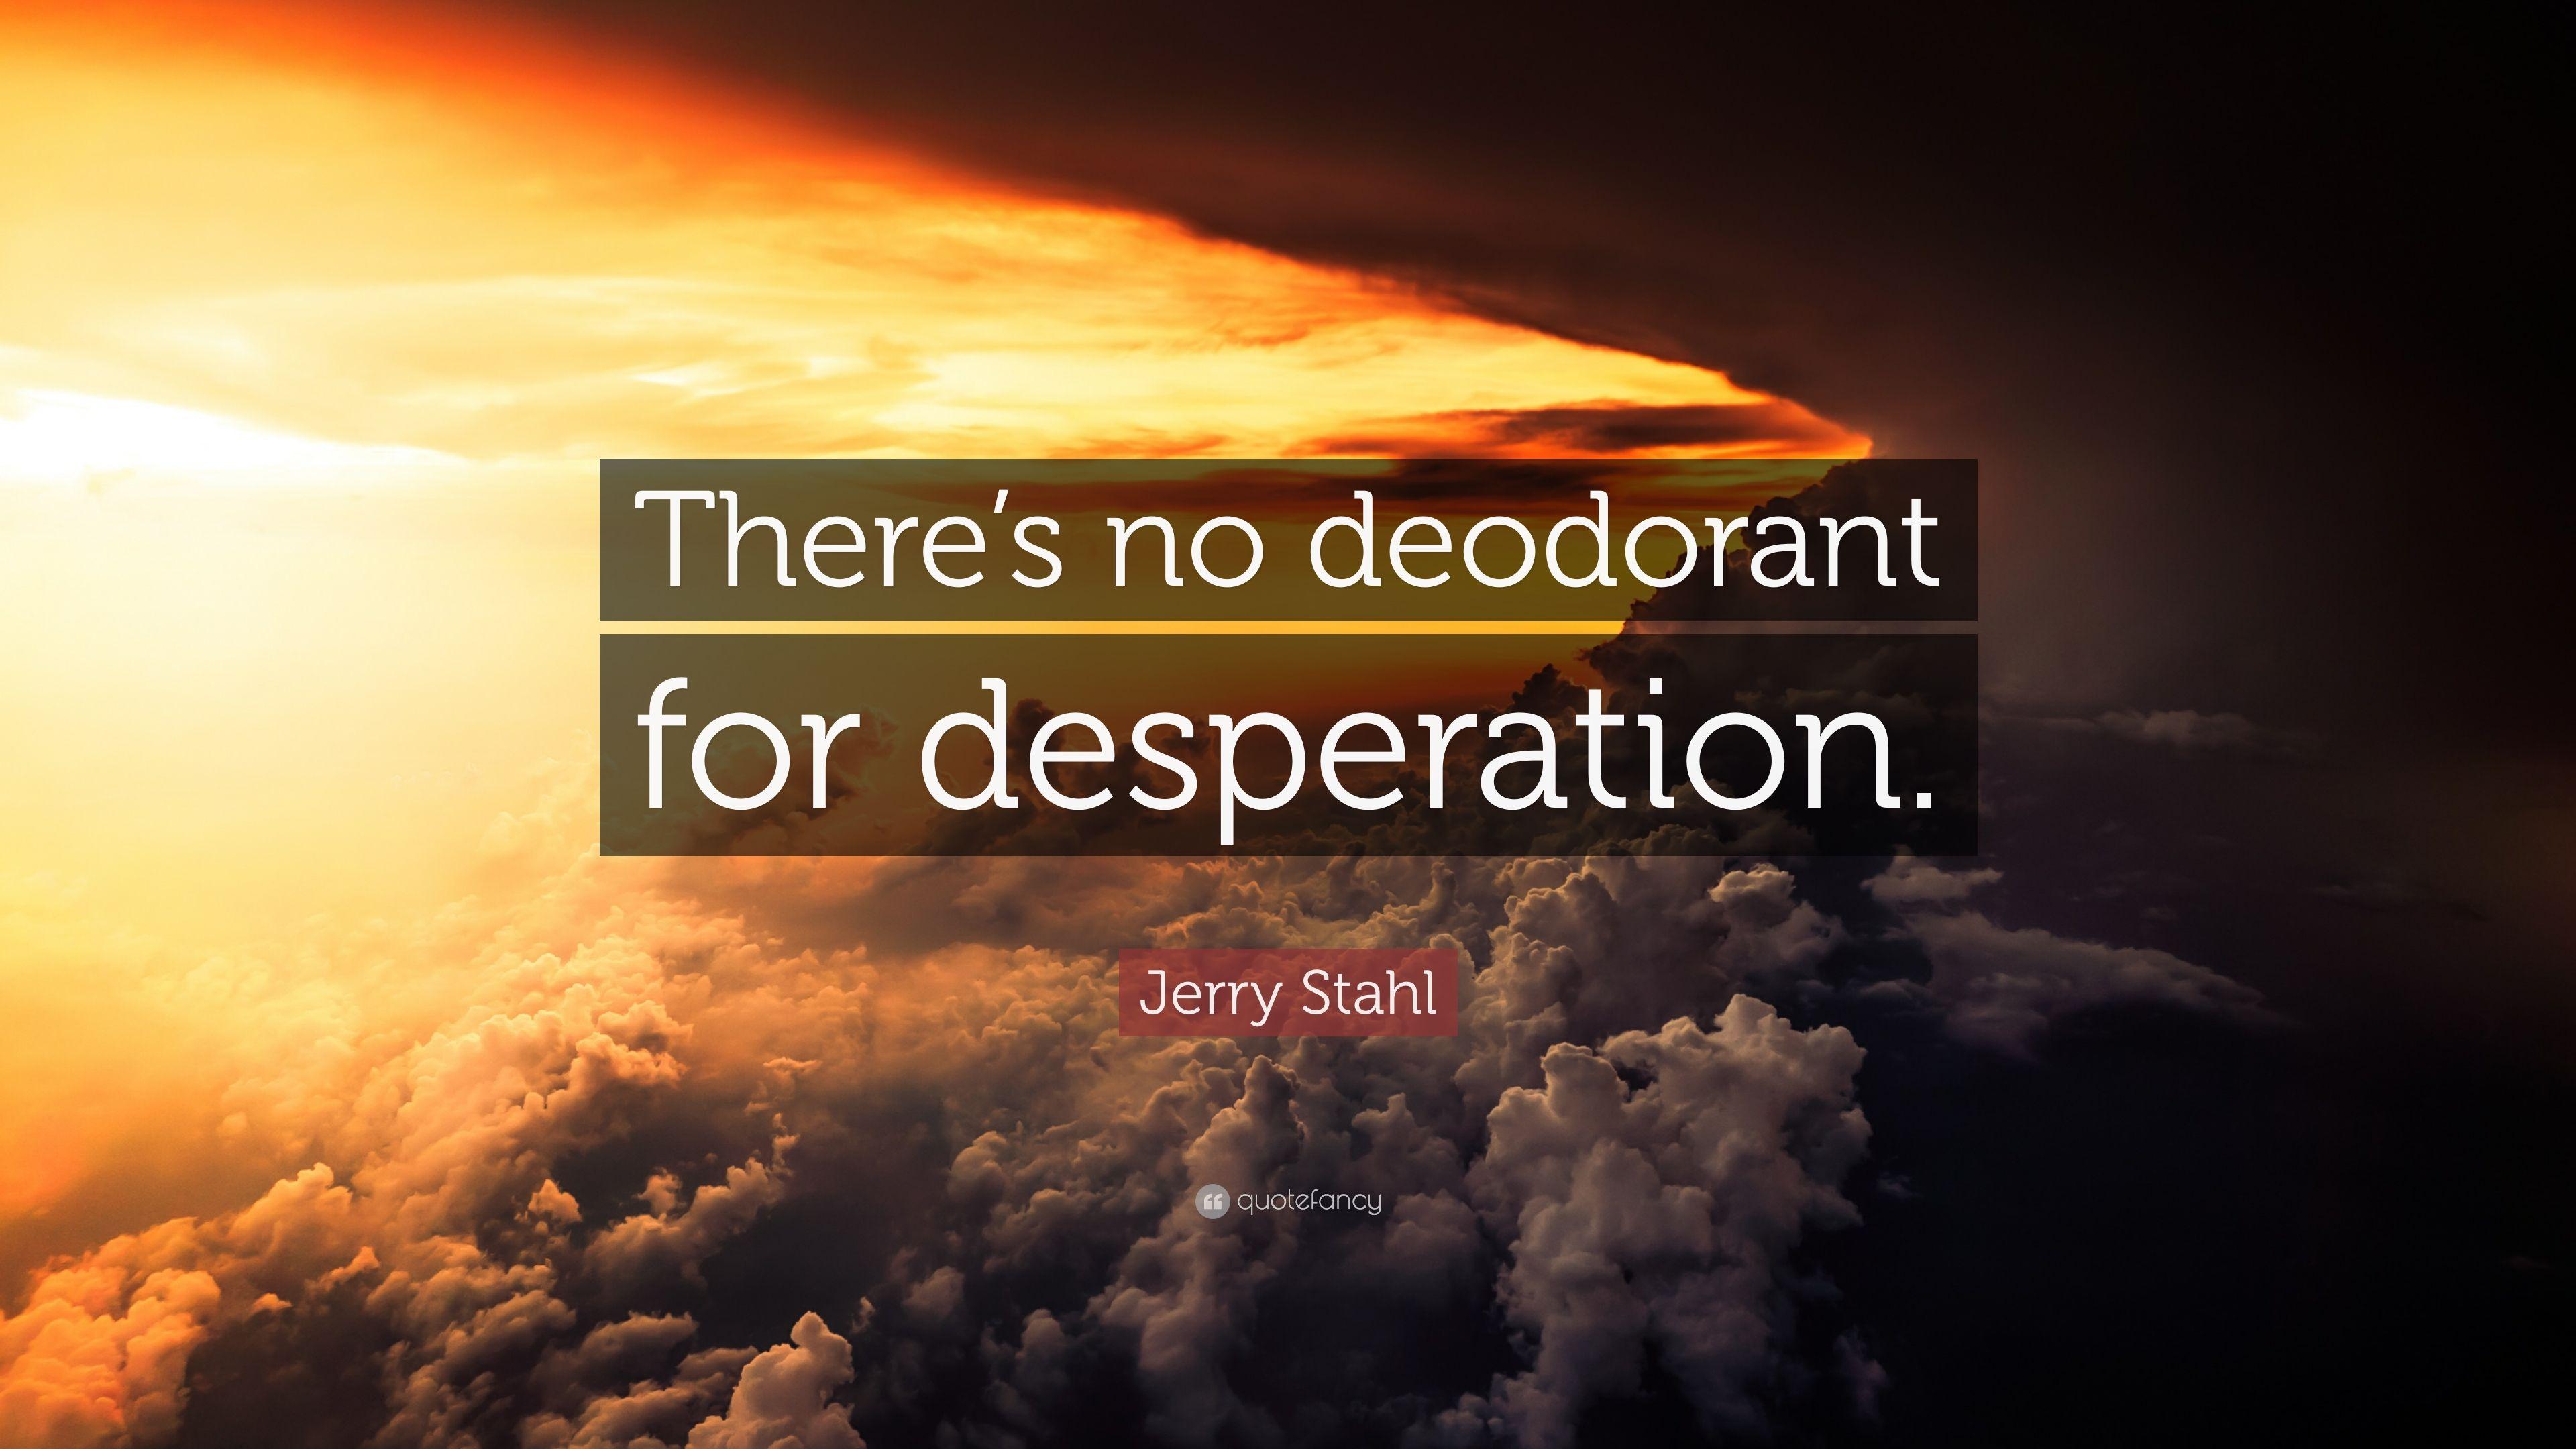 Jerry Stahl Quote: “There's no deodorant for desperation.” 7